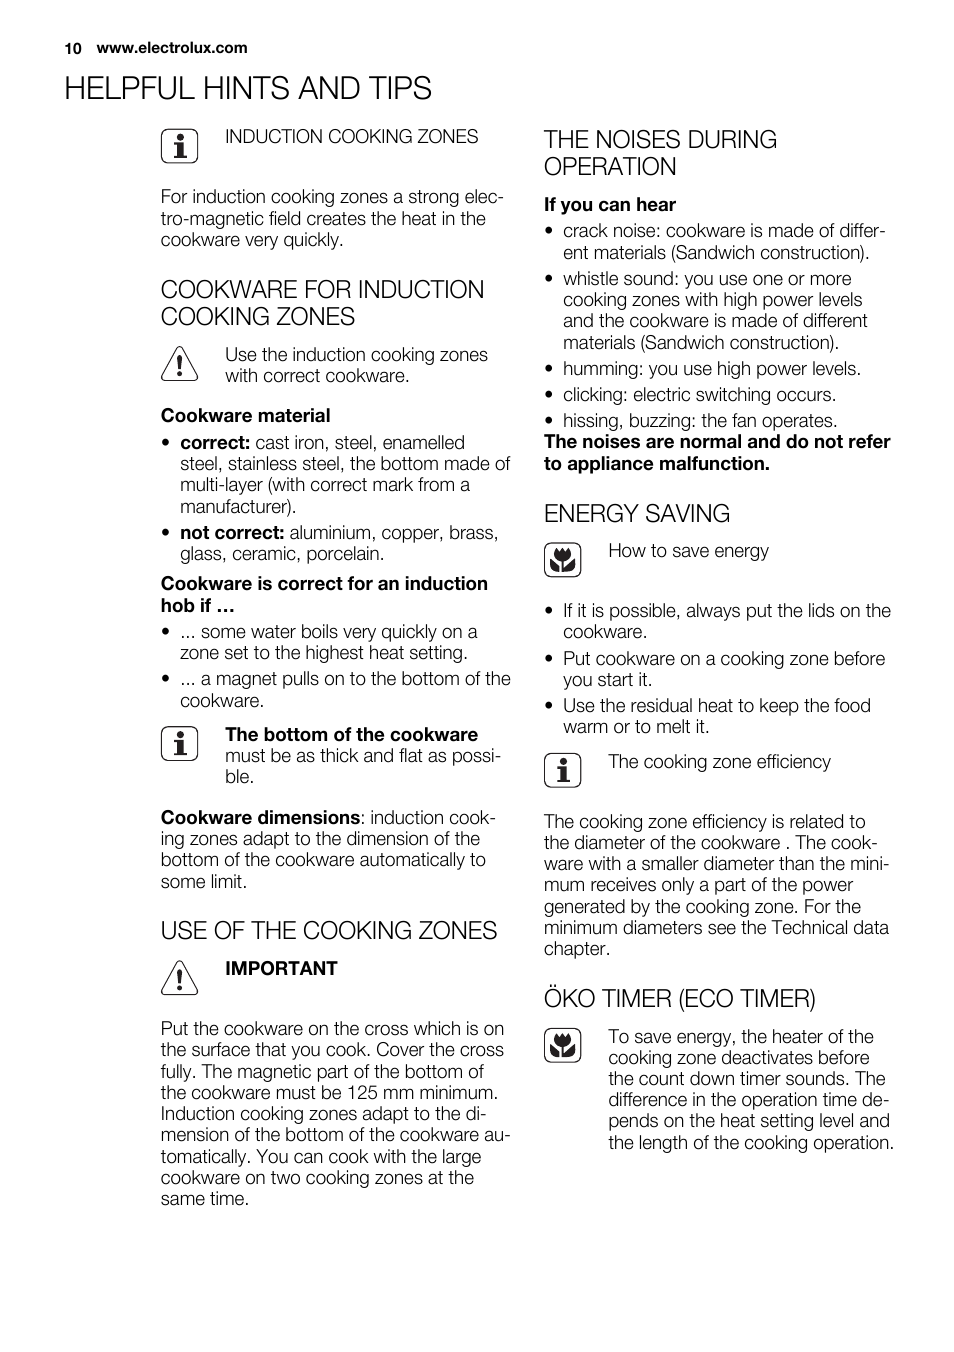 Helpful hints and tips, Cookware for induction cooking zones, Use of the  cooking zones | Electrolux EHI 6740 FOK User Manual | Page 10 / 80 |  Original mode